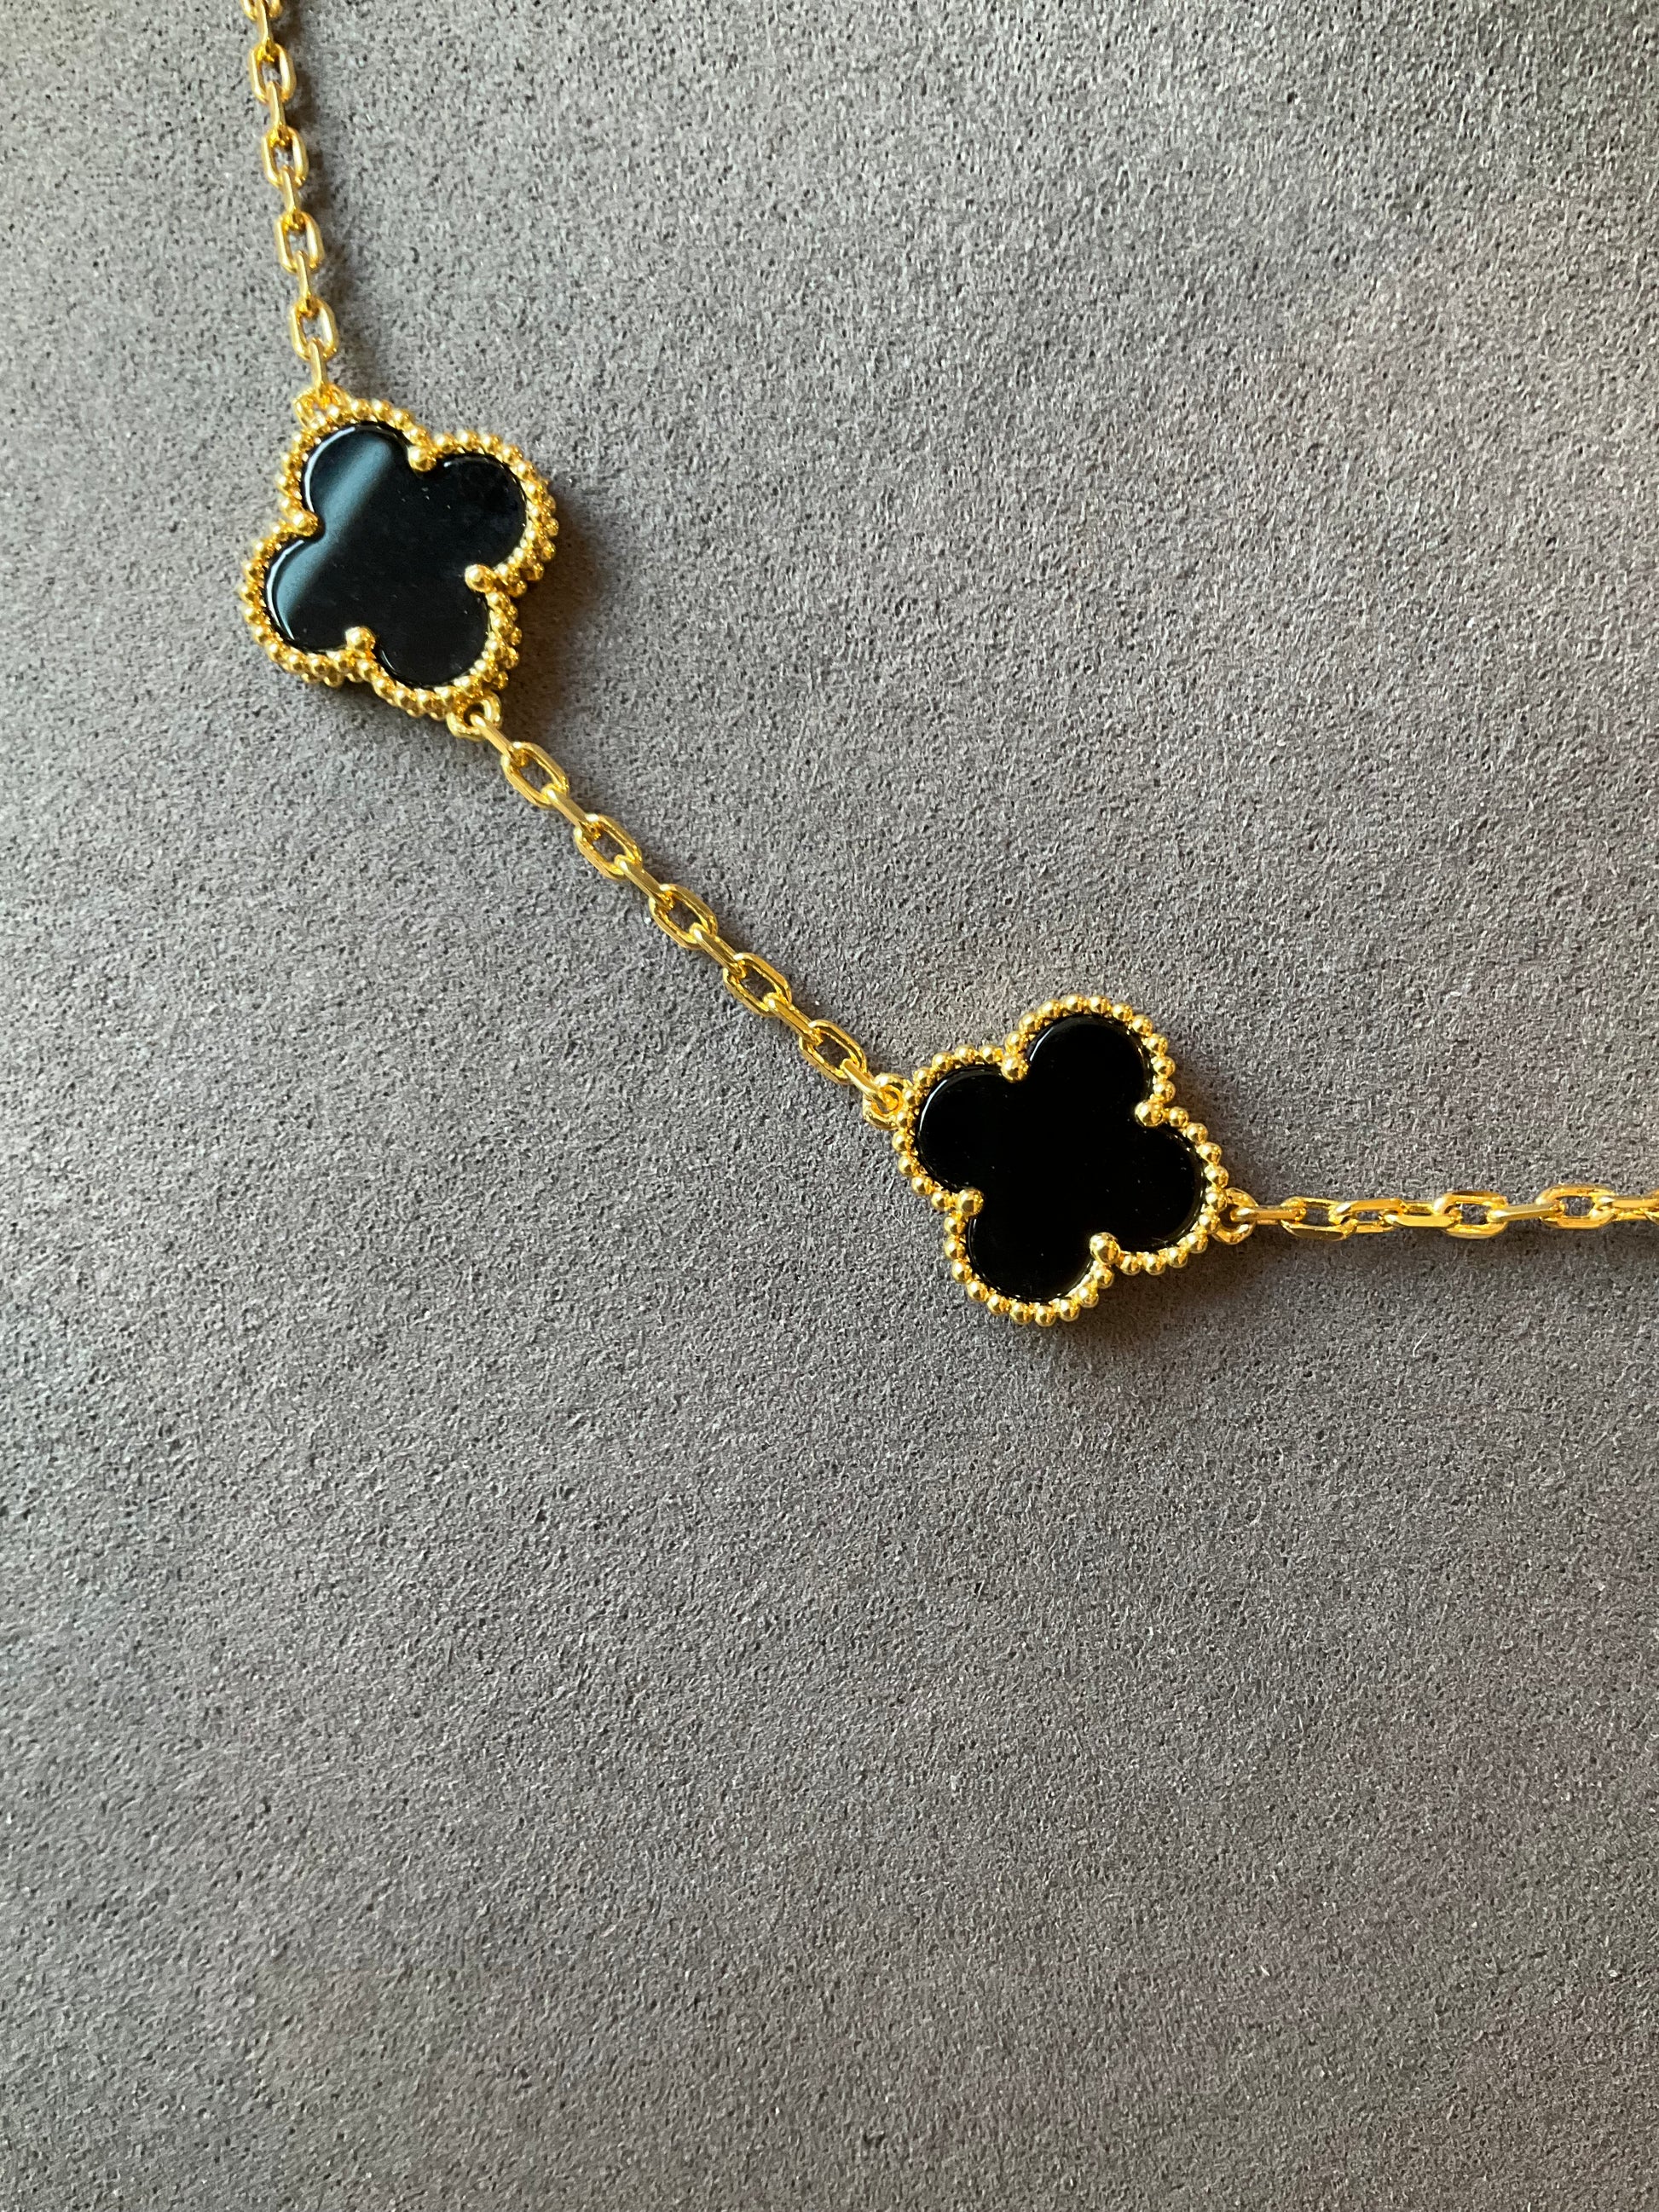 10 motifs onyx 15mm clover necklace 925 silver with 18k gold plated 42 cm long - ParadiseKissCo